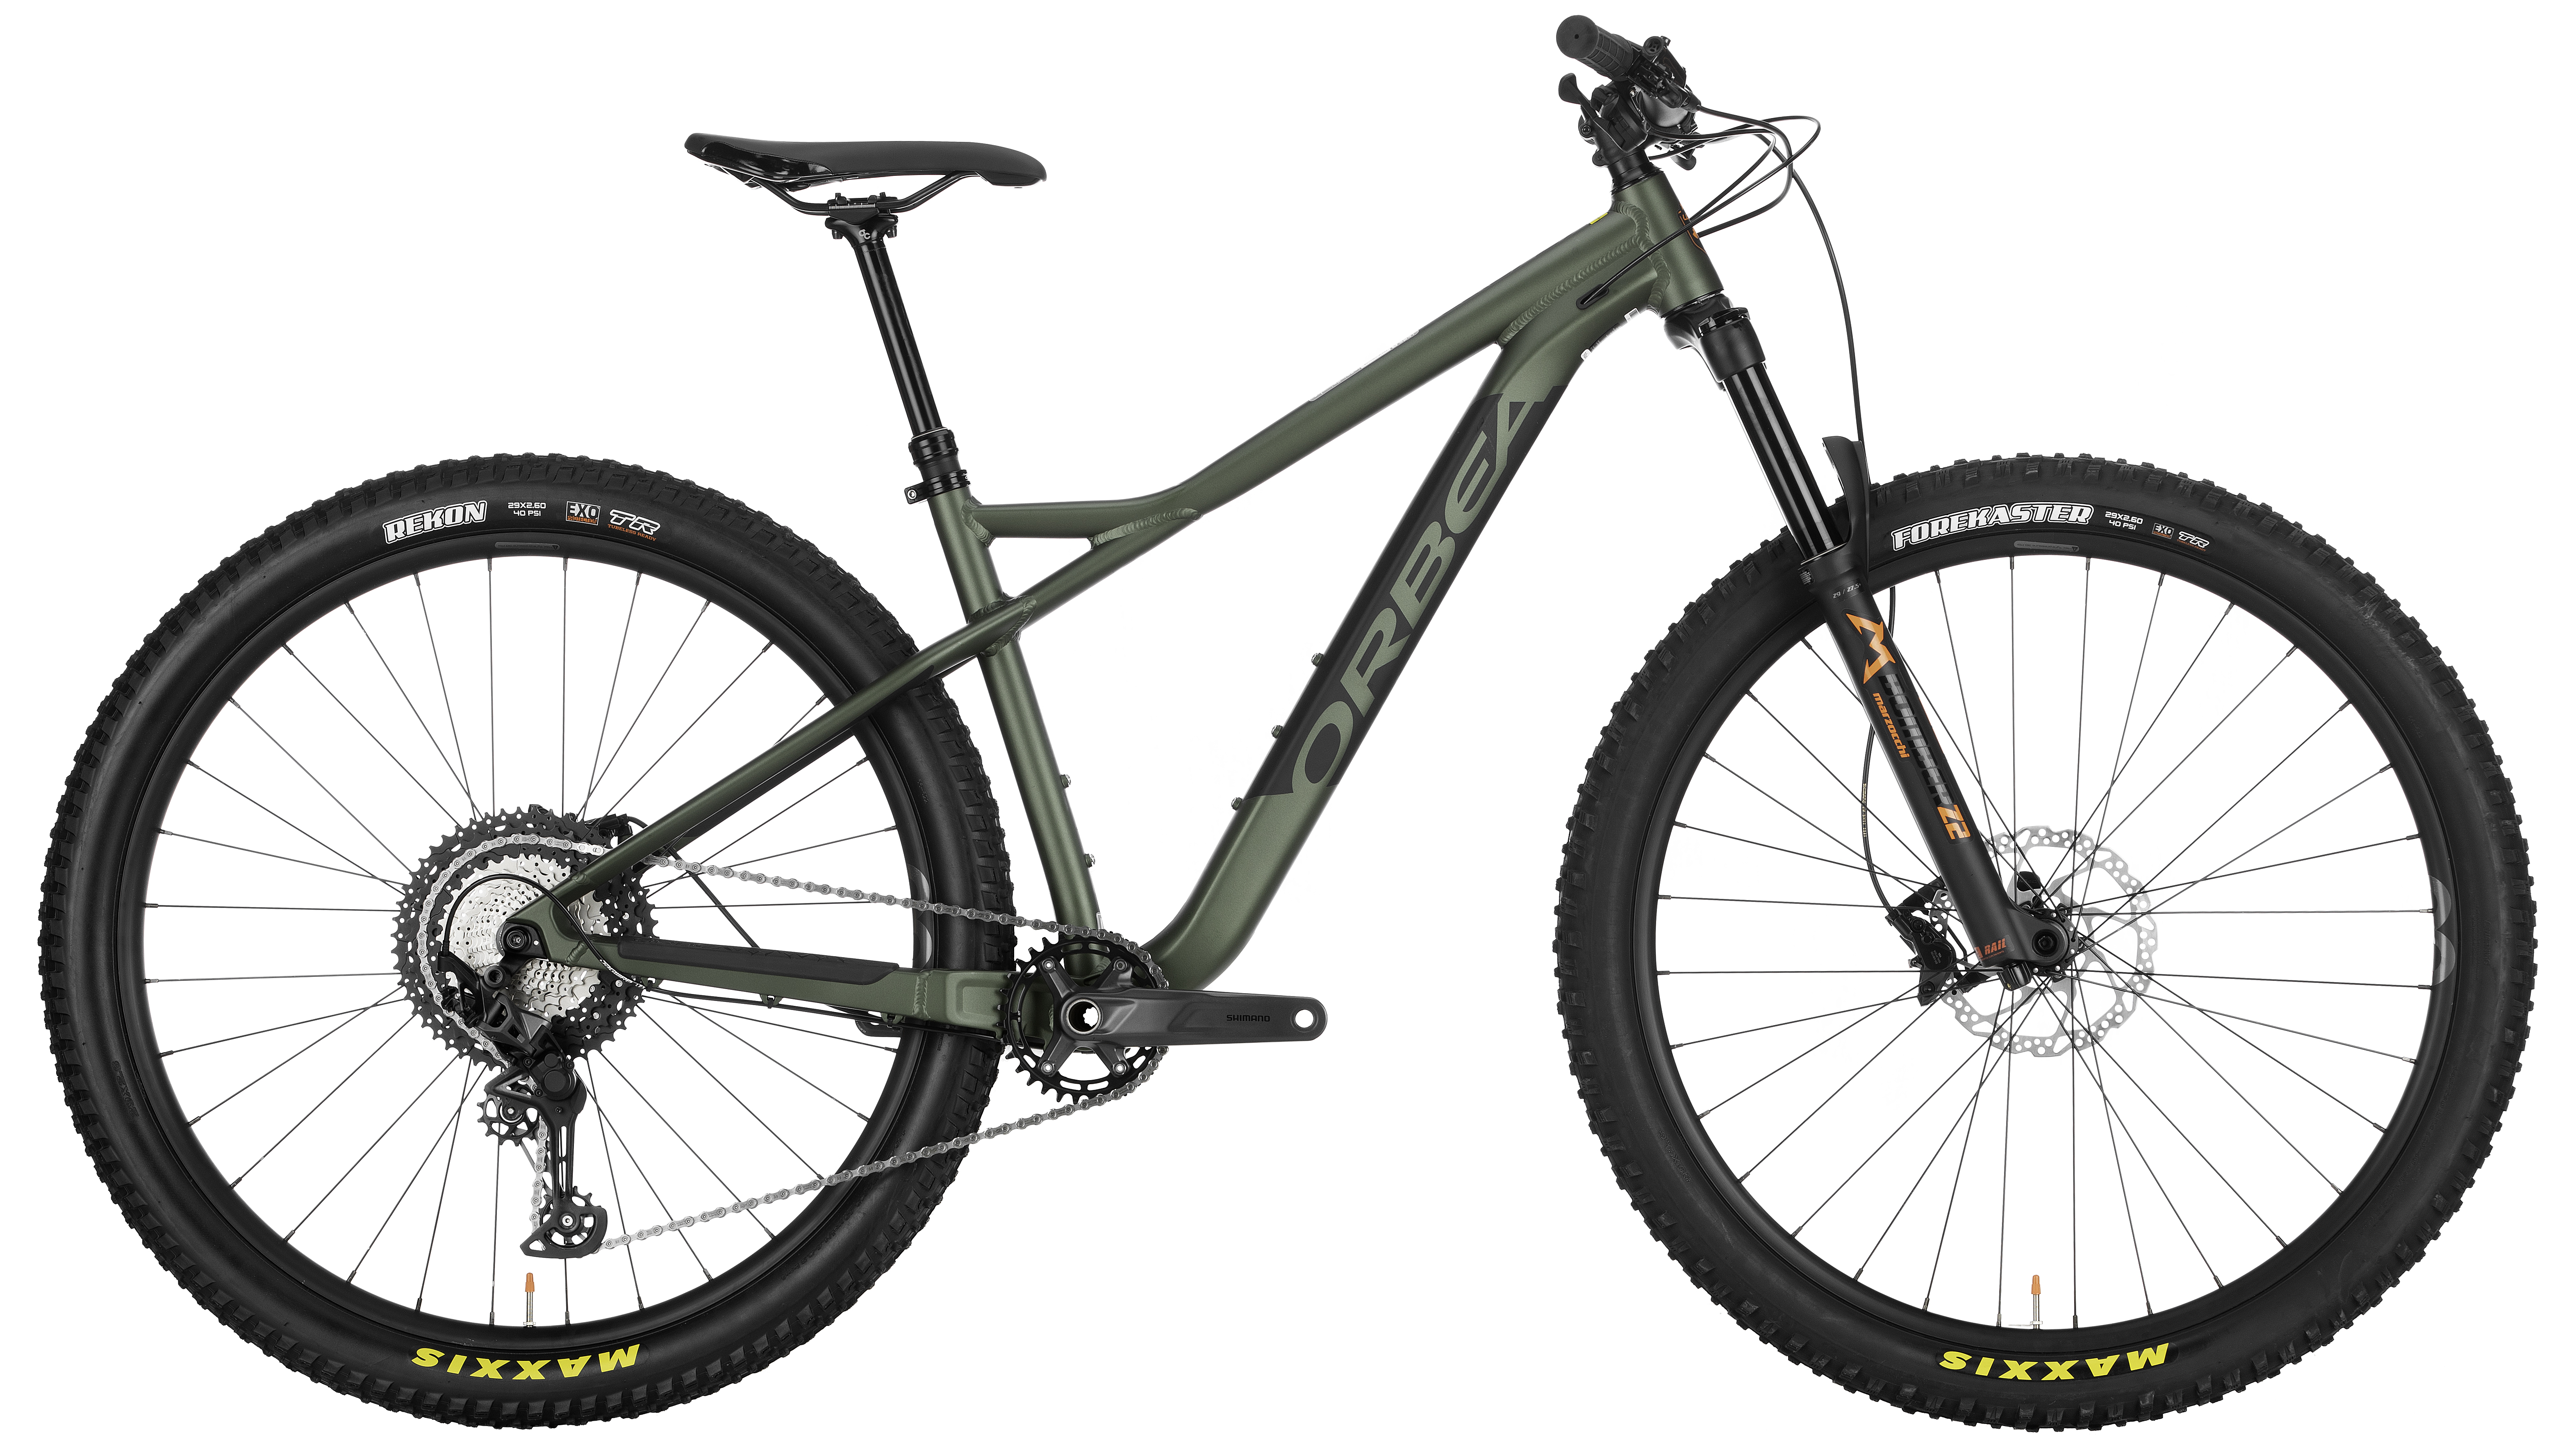 Highly versatile hardtail bike that is built for the trails.